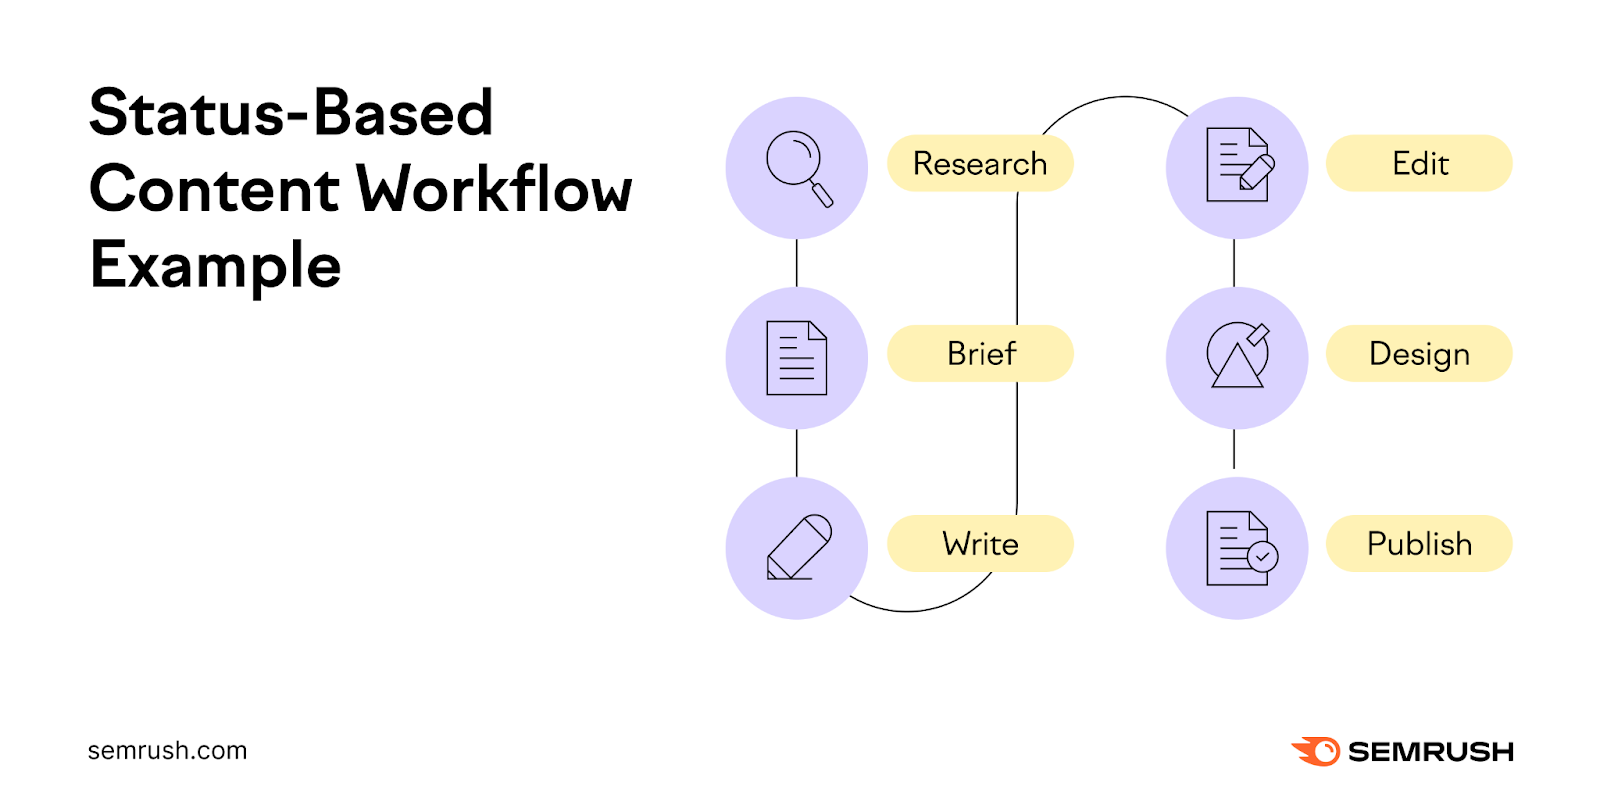 A status-based contented  workflow template